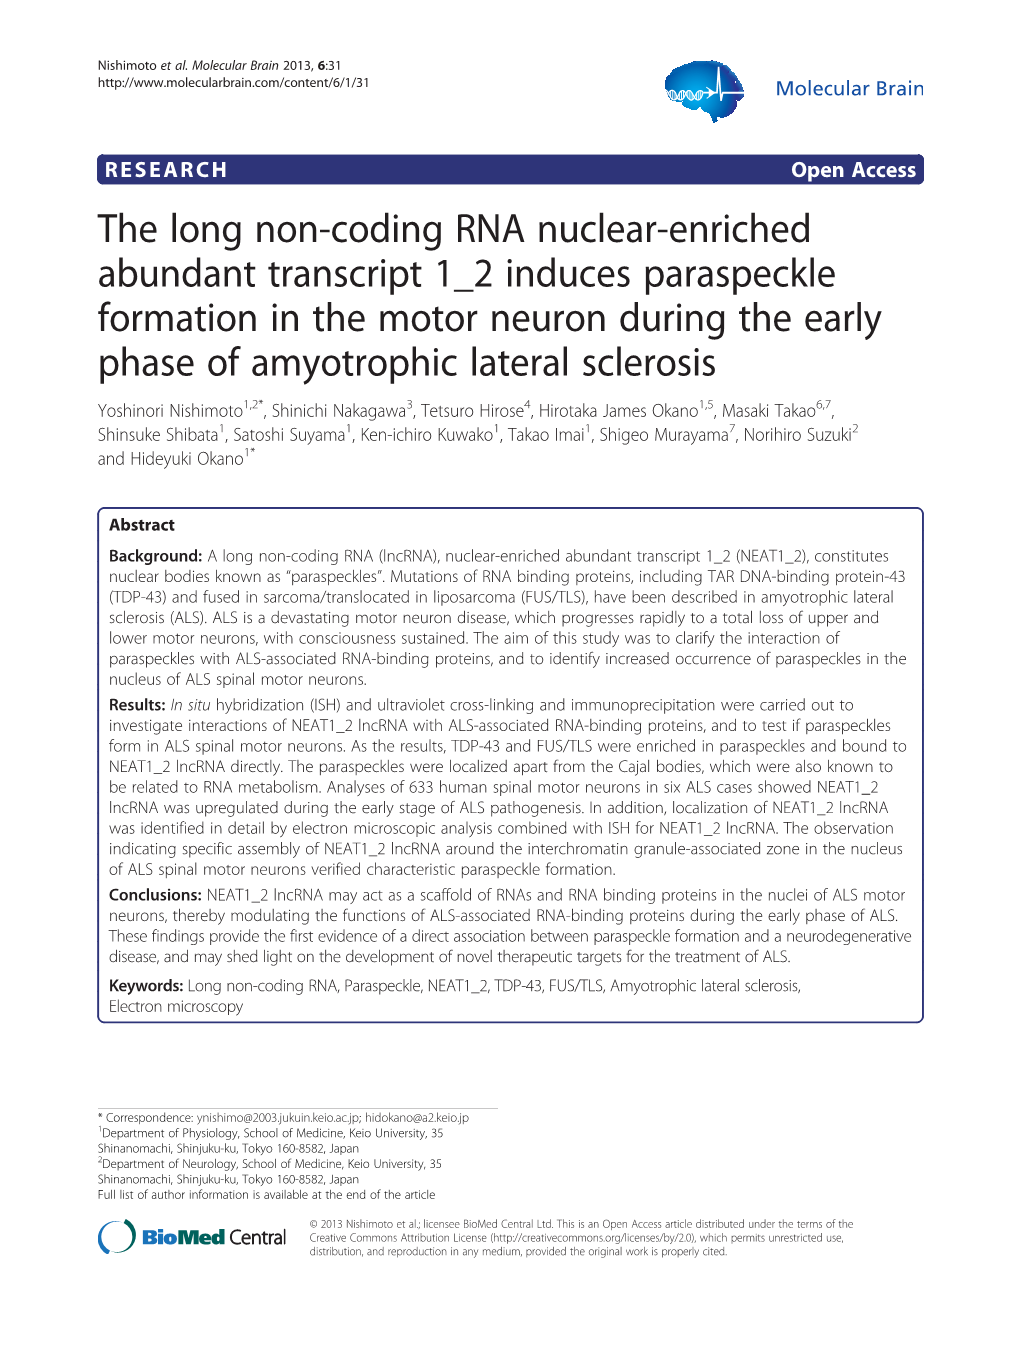 The Long Non-Coding RNA Nuclear-Enriched Abundant